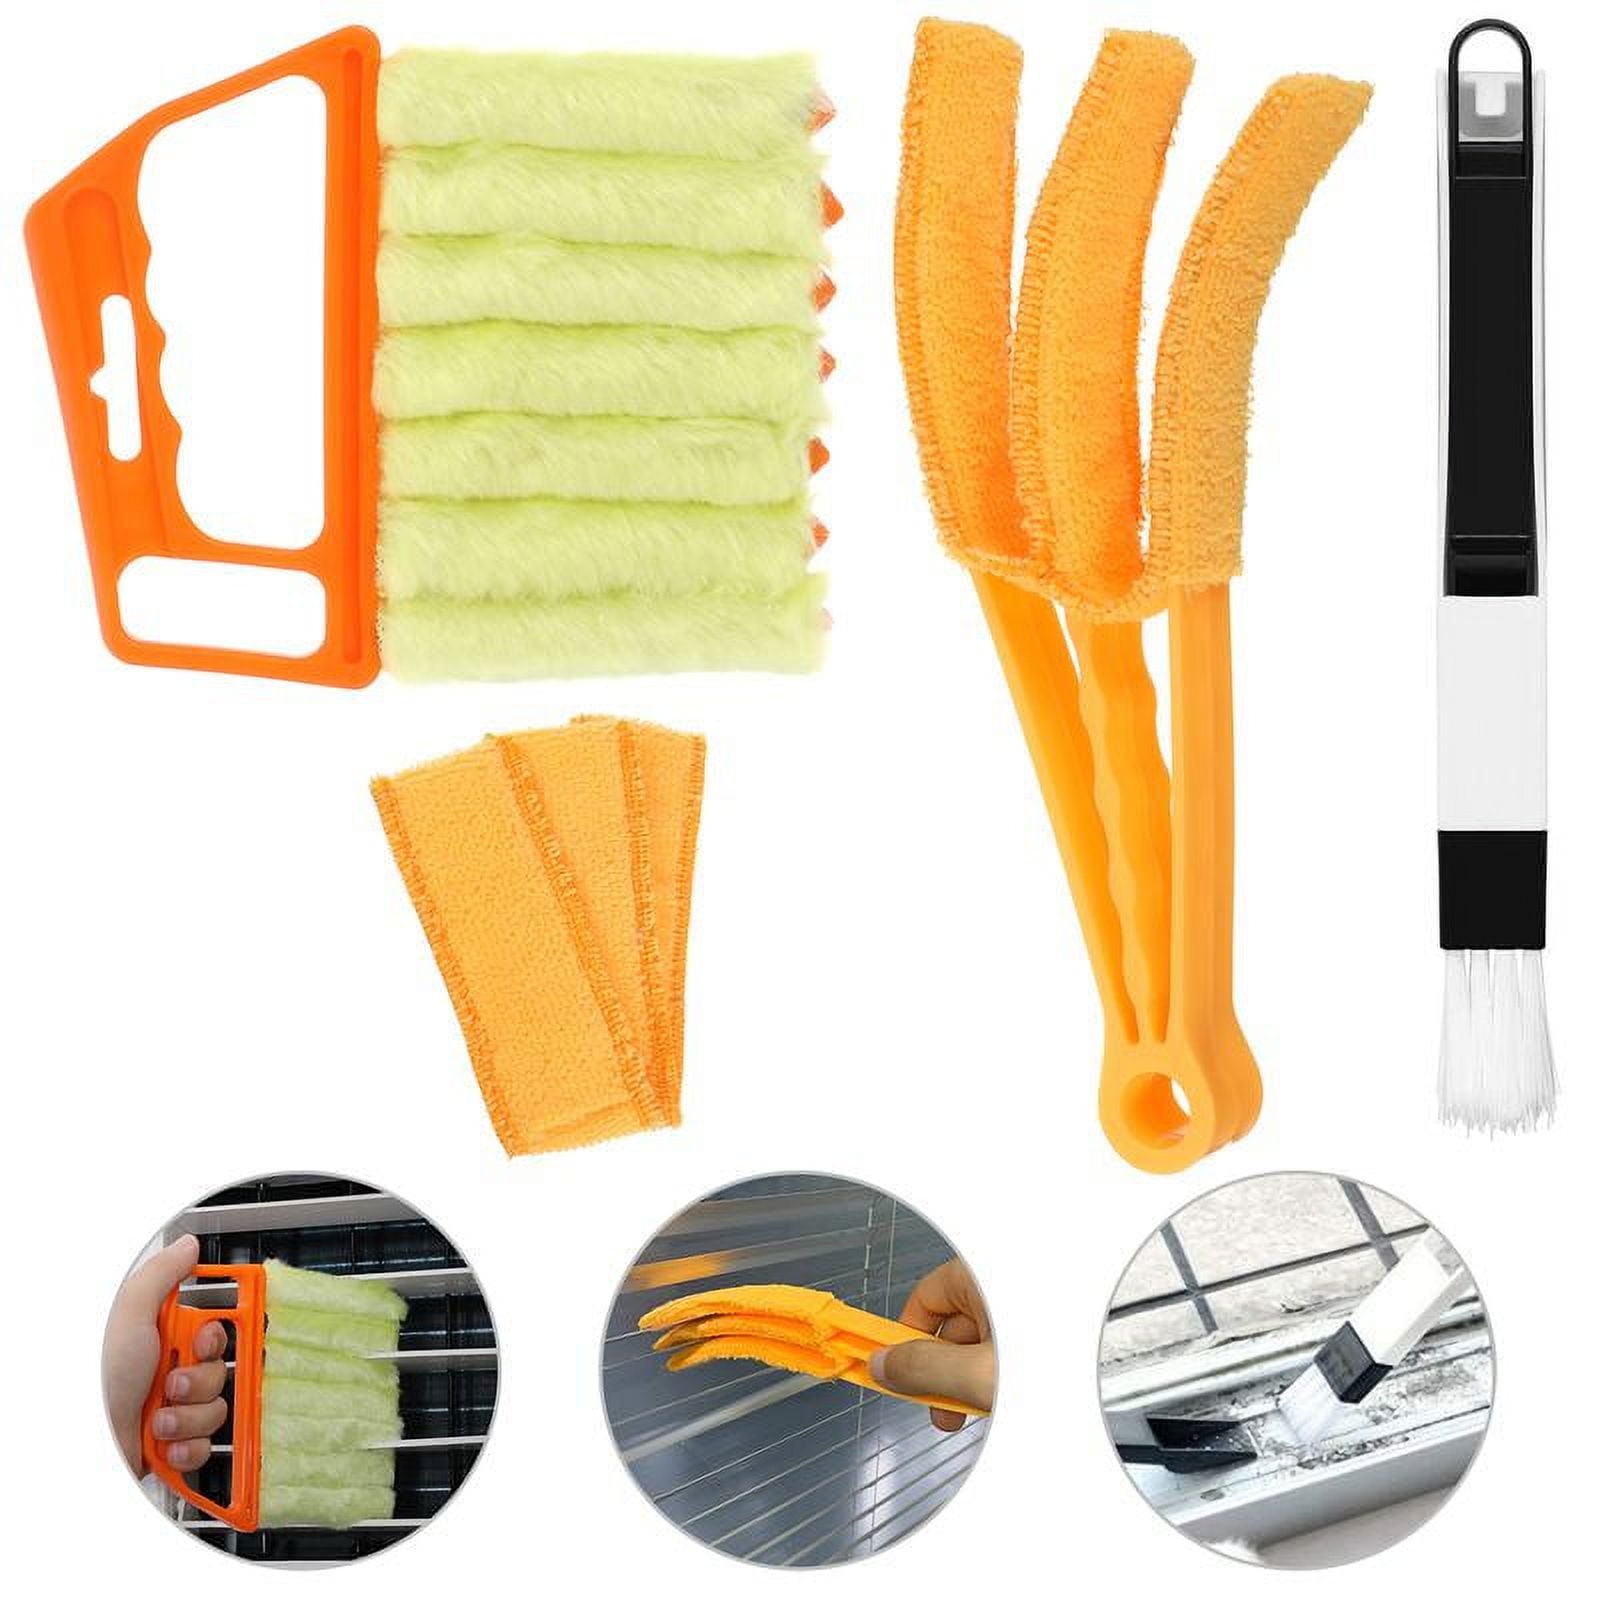  Hiware Window Blind Cleaner Duster Brush with 5